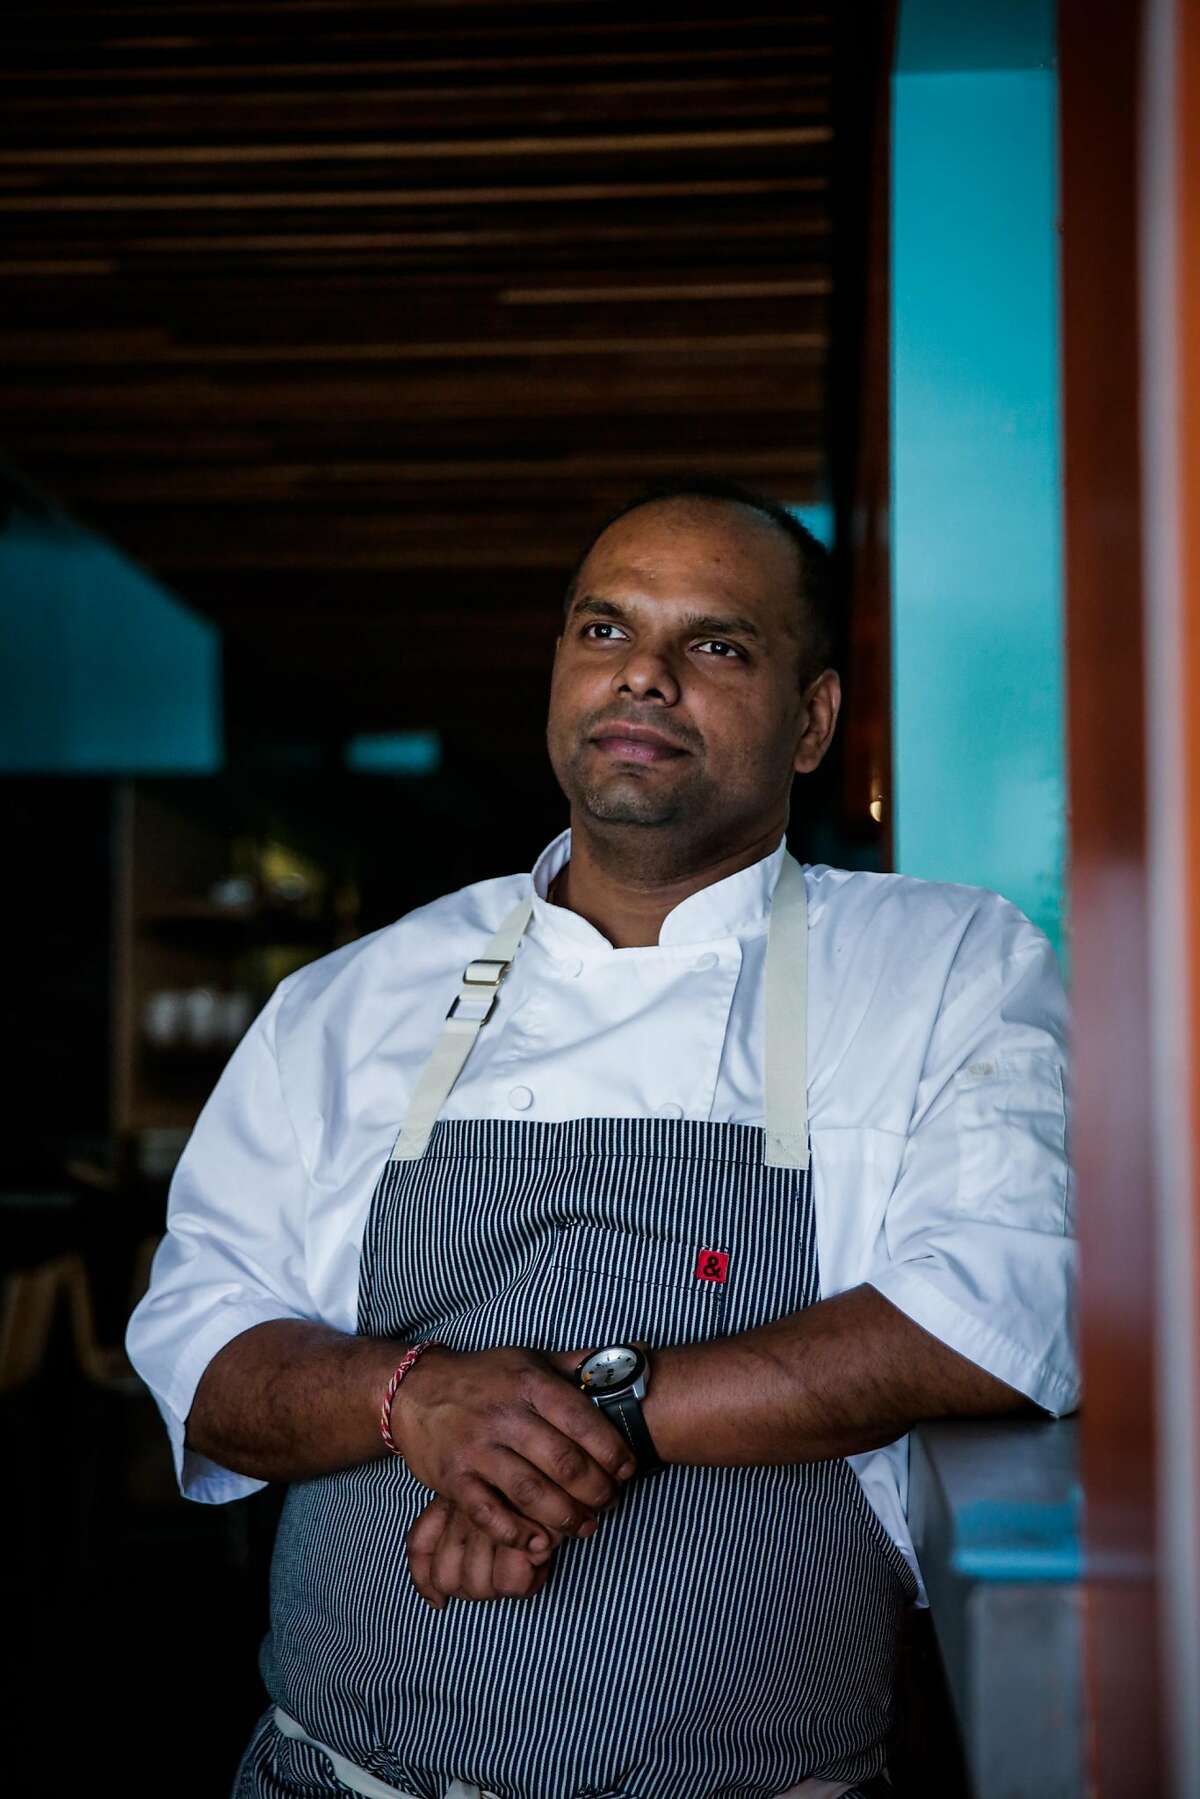 Chef Rupam Bhagat stands for a portrait at his restaurant Dum Indian in San Francisco, California, on Monday, May 8, 2017.